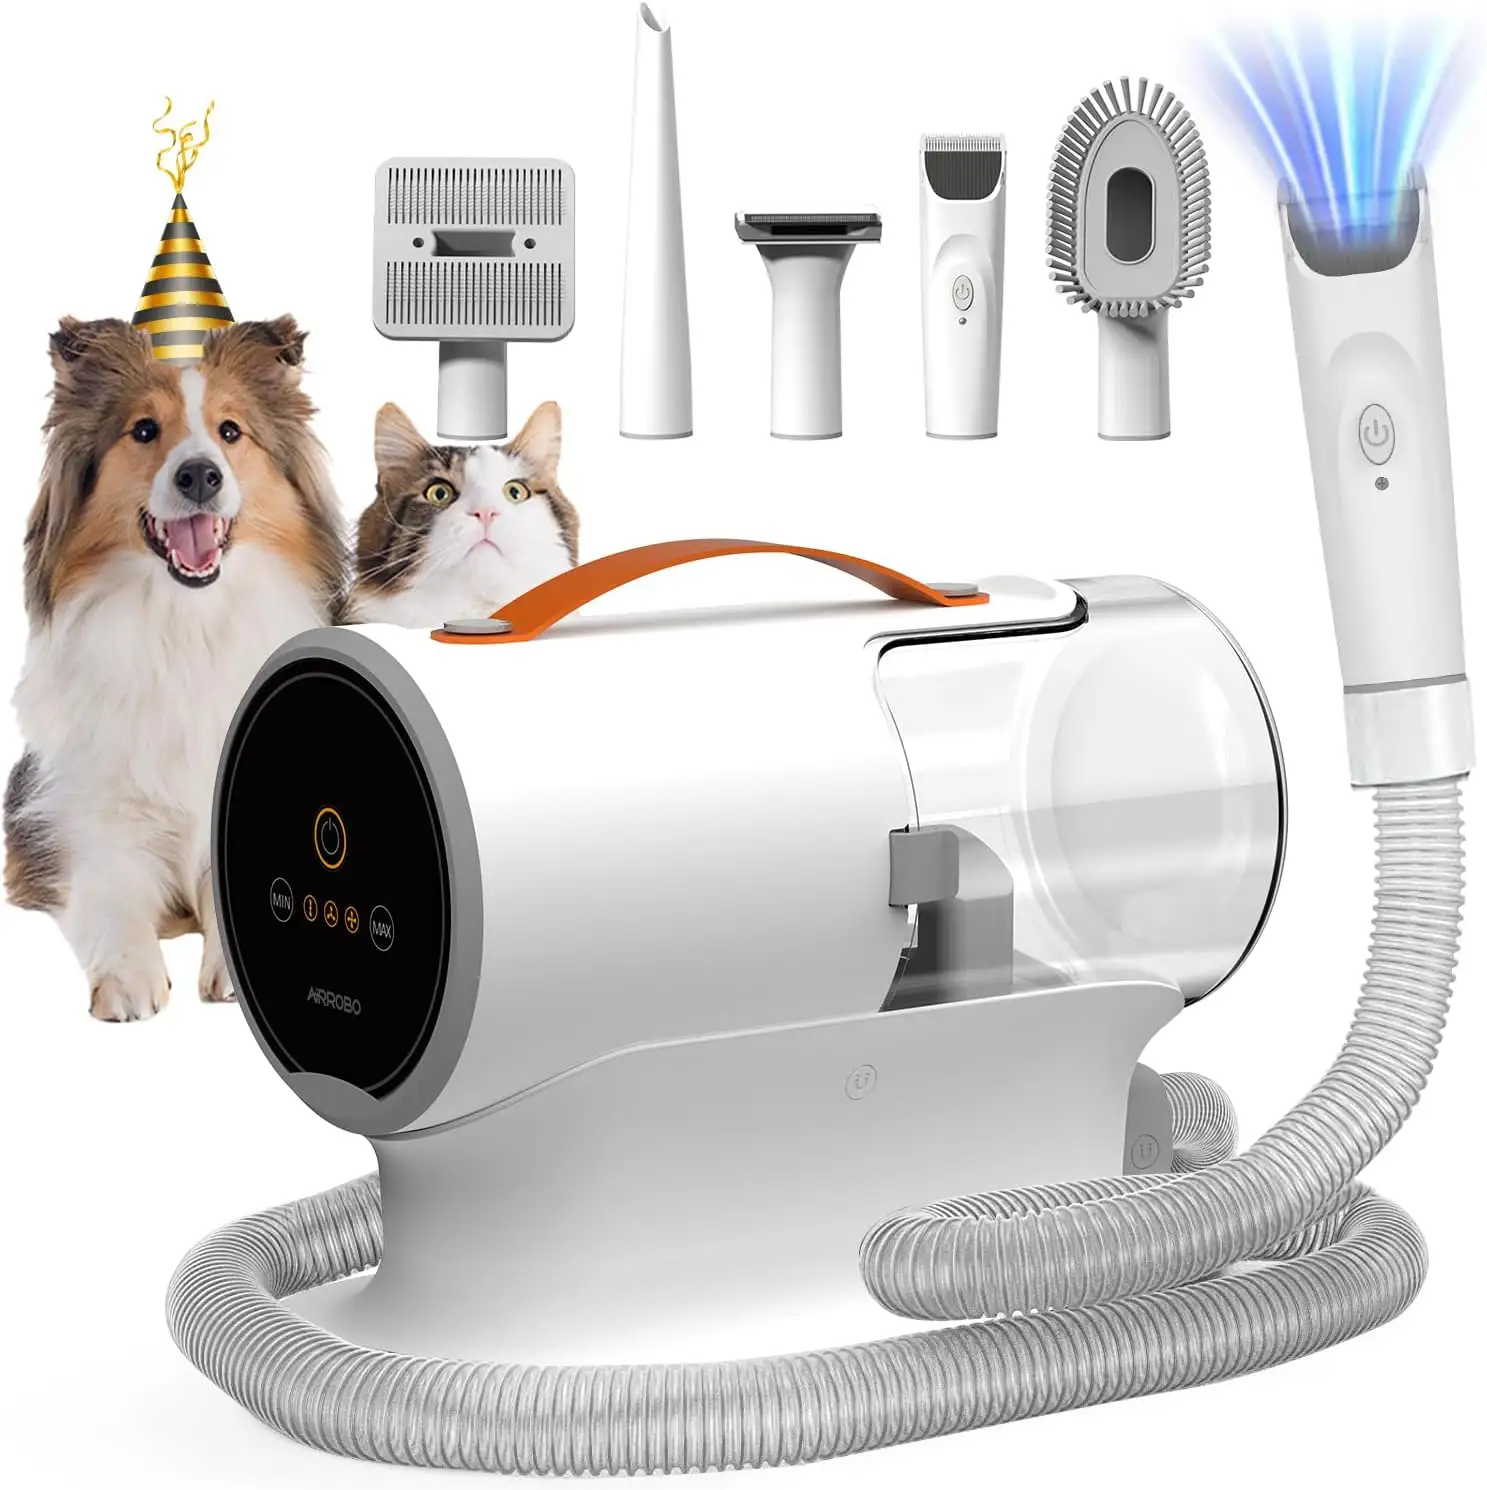 AIRROBO Pet Grooming Vacuum For Dogs Cats Hair Clipper 5 in 1 Pet Grooming Kit With Comb Trimmer Cleaning Brush